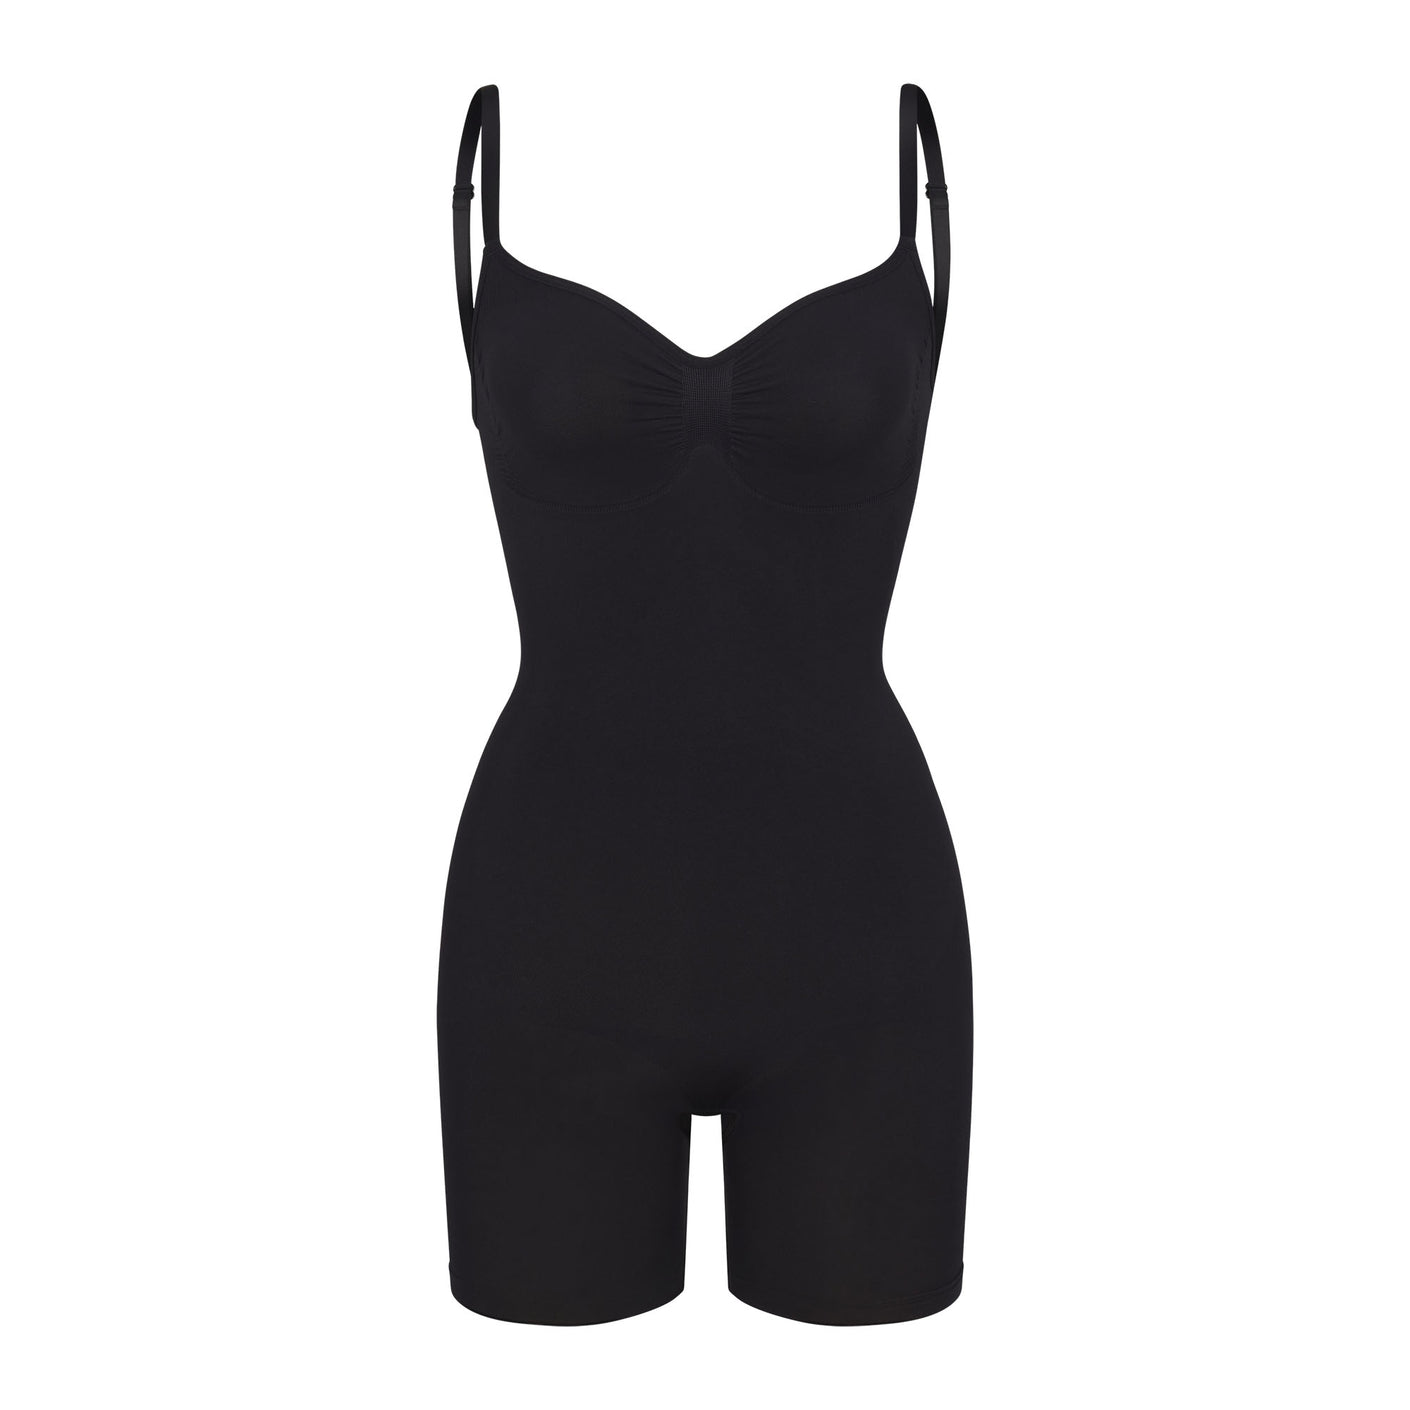 Track Barely There Low Back Catsuit - Sienna - XS at Skims